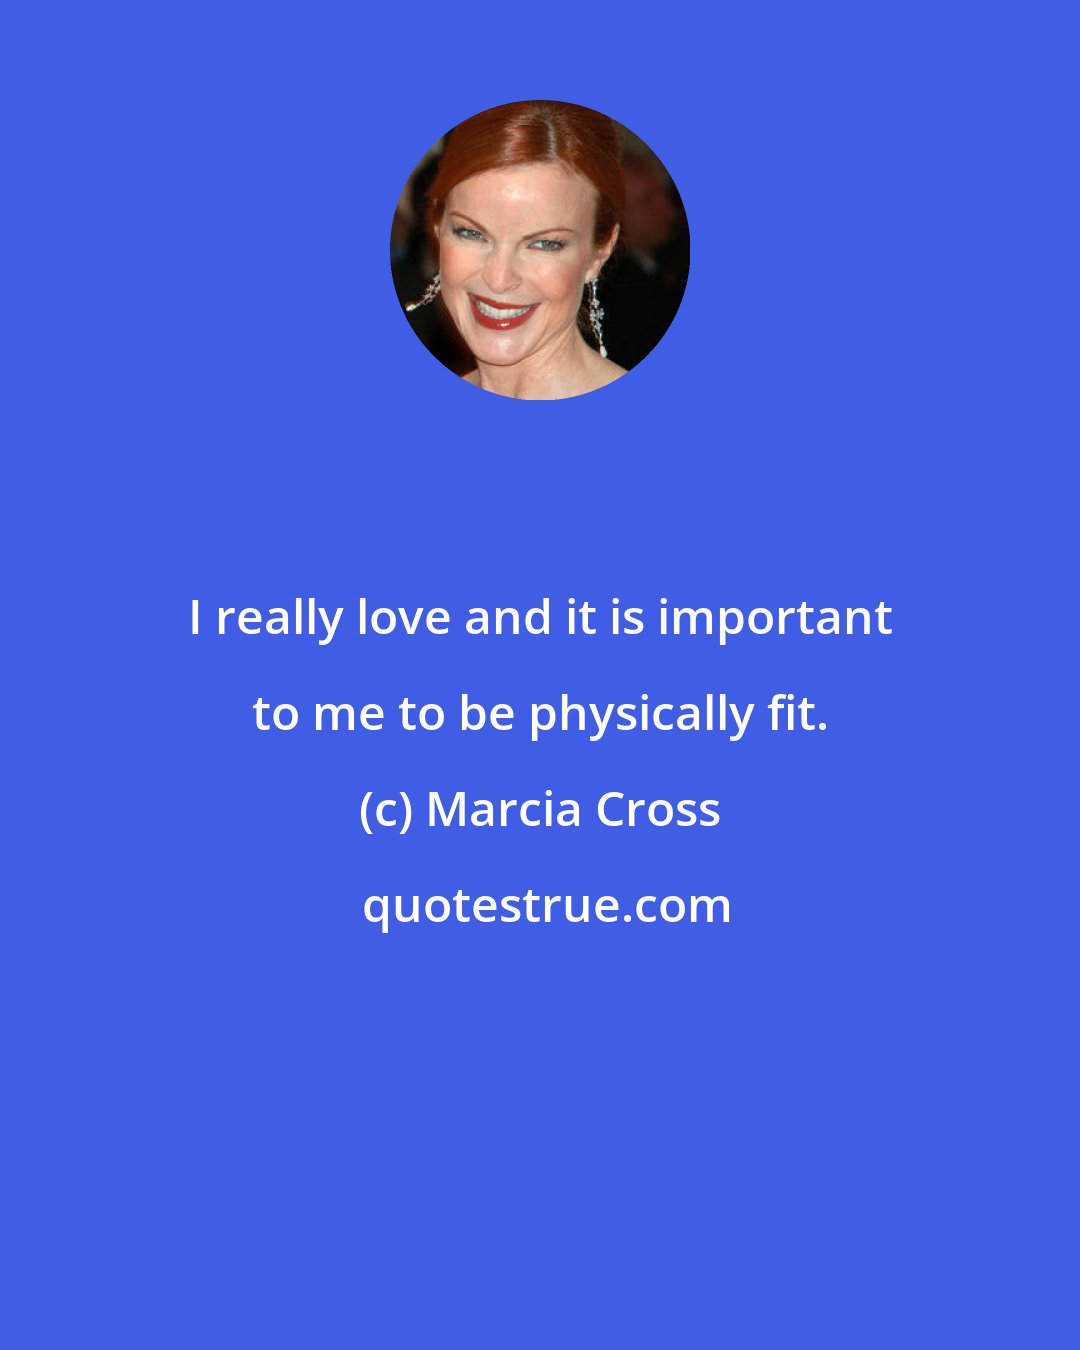 Marcia Cross: I really love and it is important to me to be physically fit.